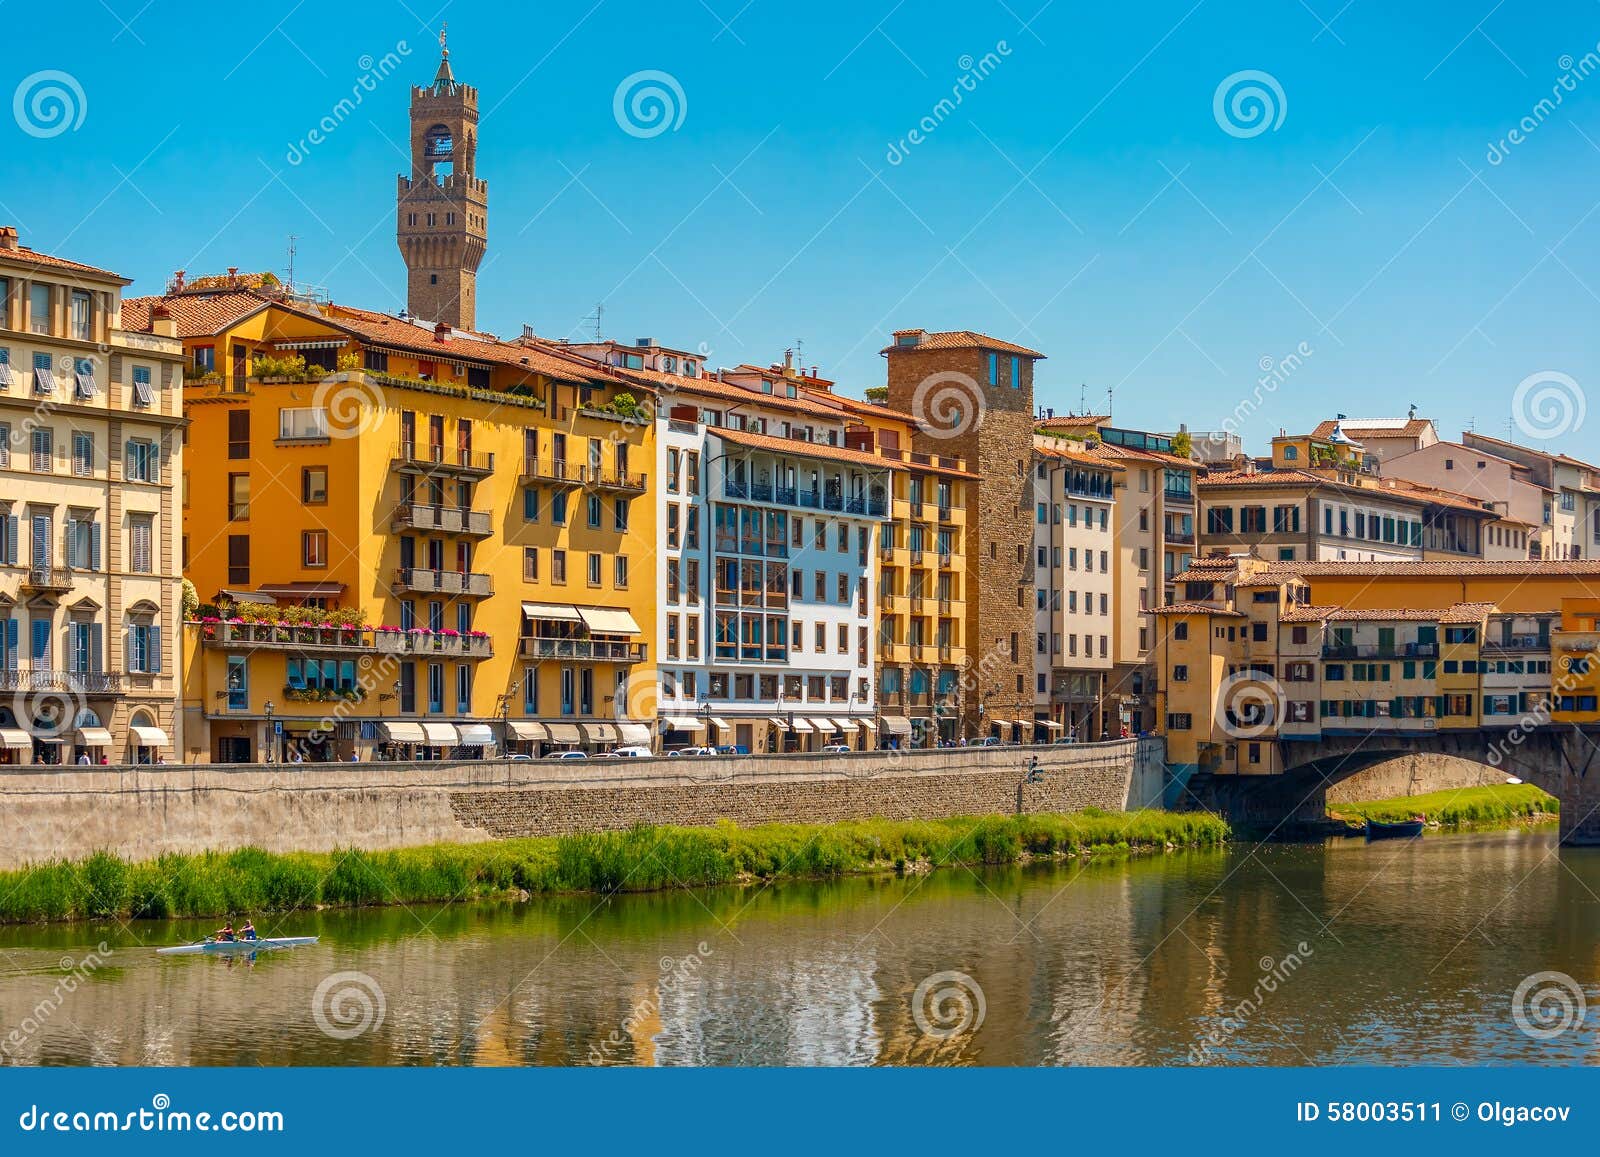 quay of arno with arnolfo tower, florence, italy